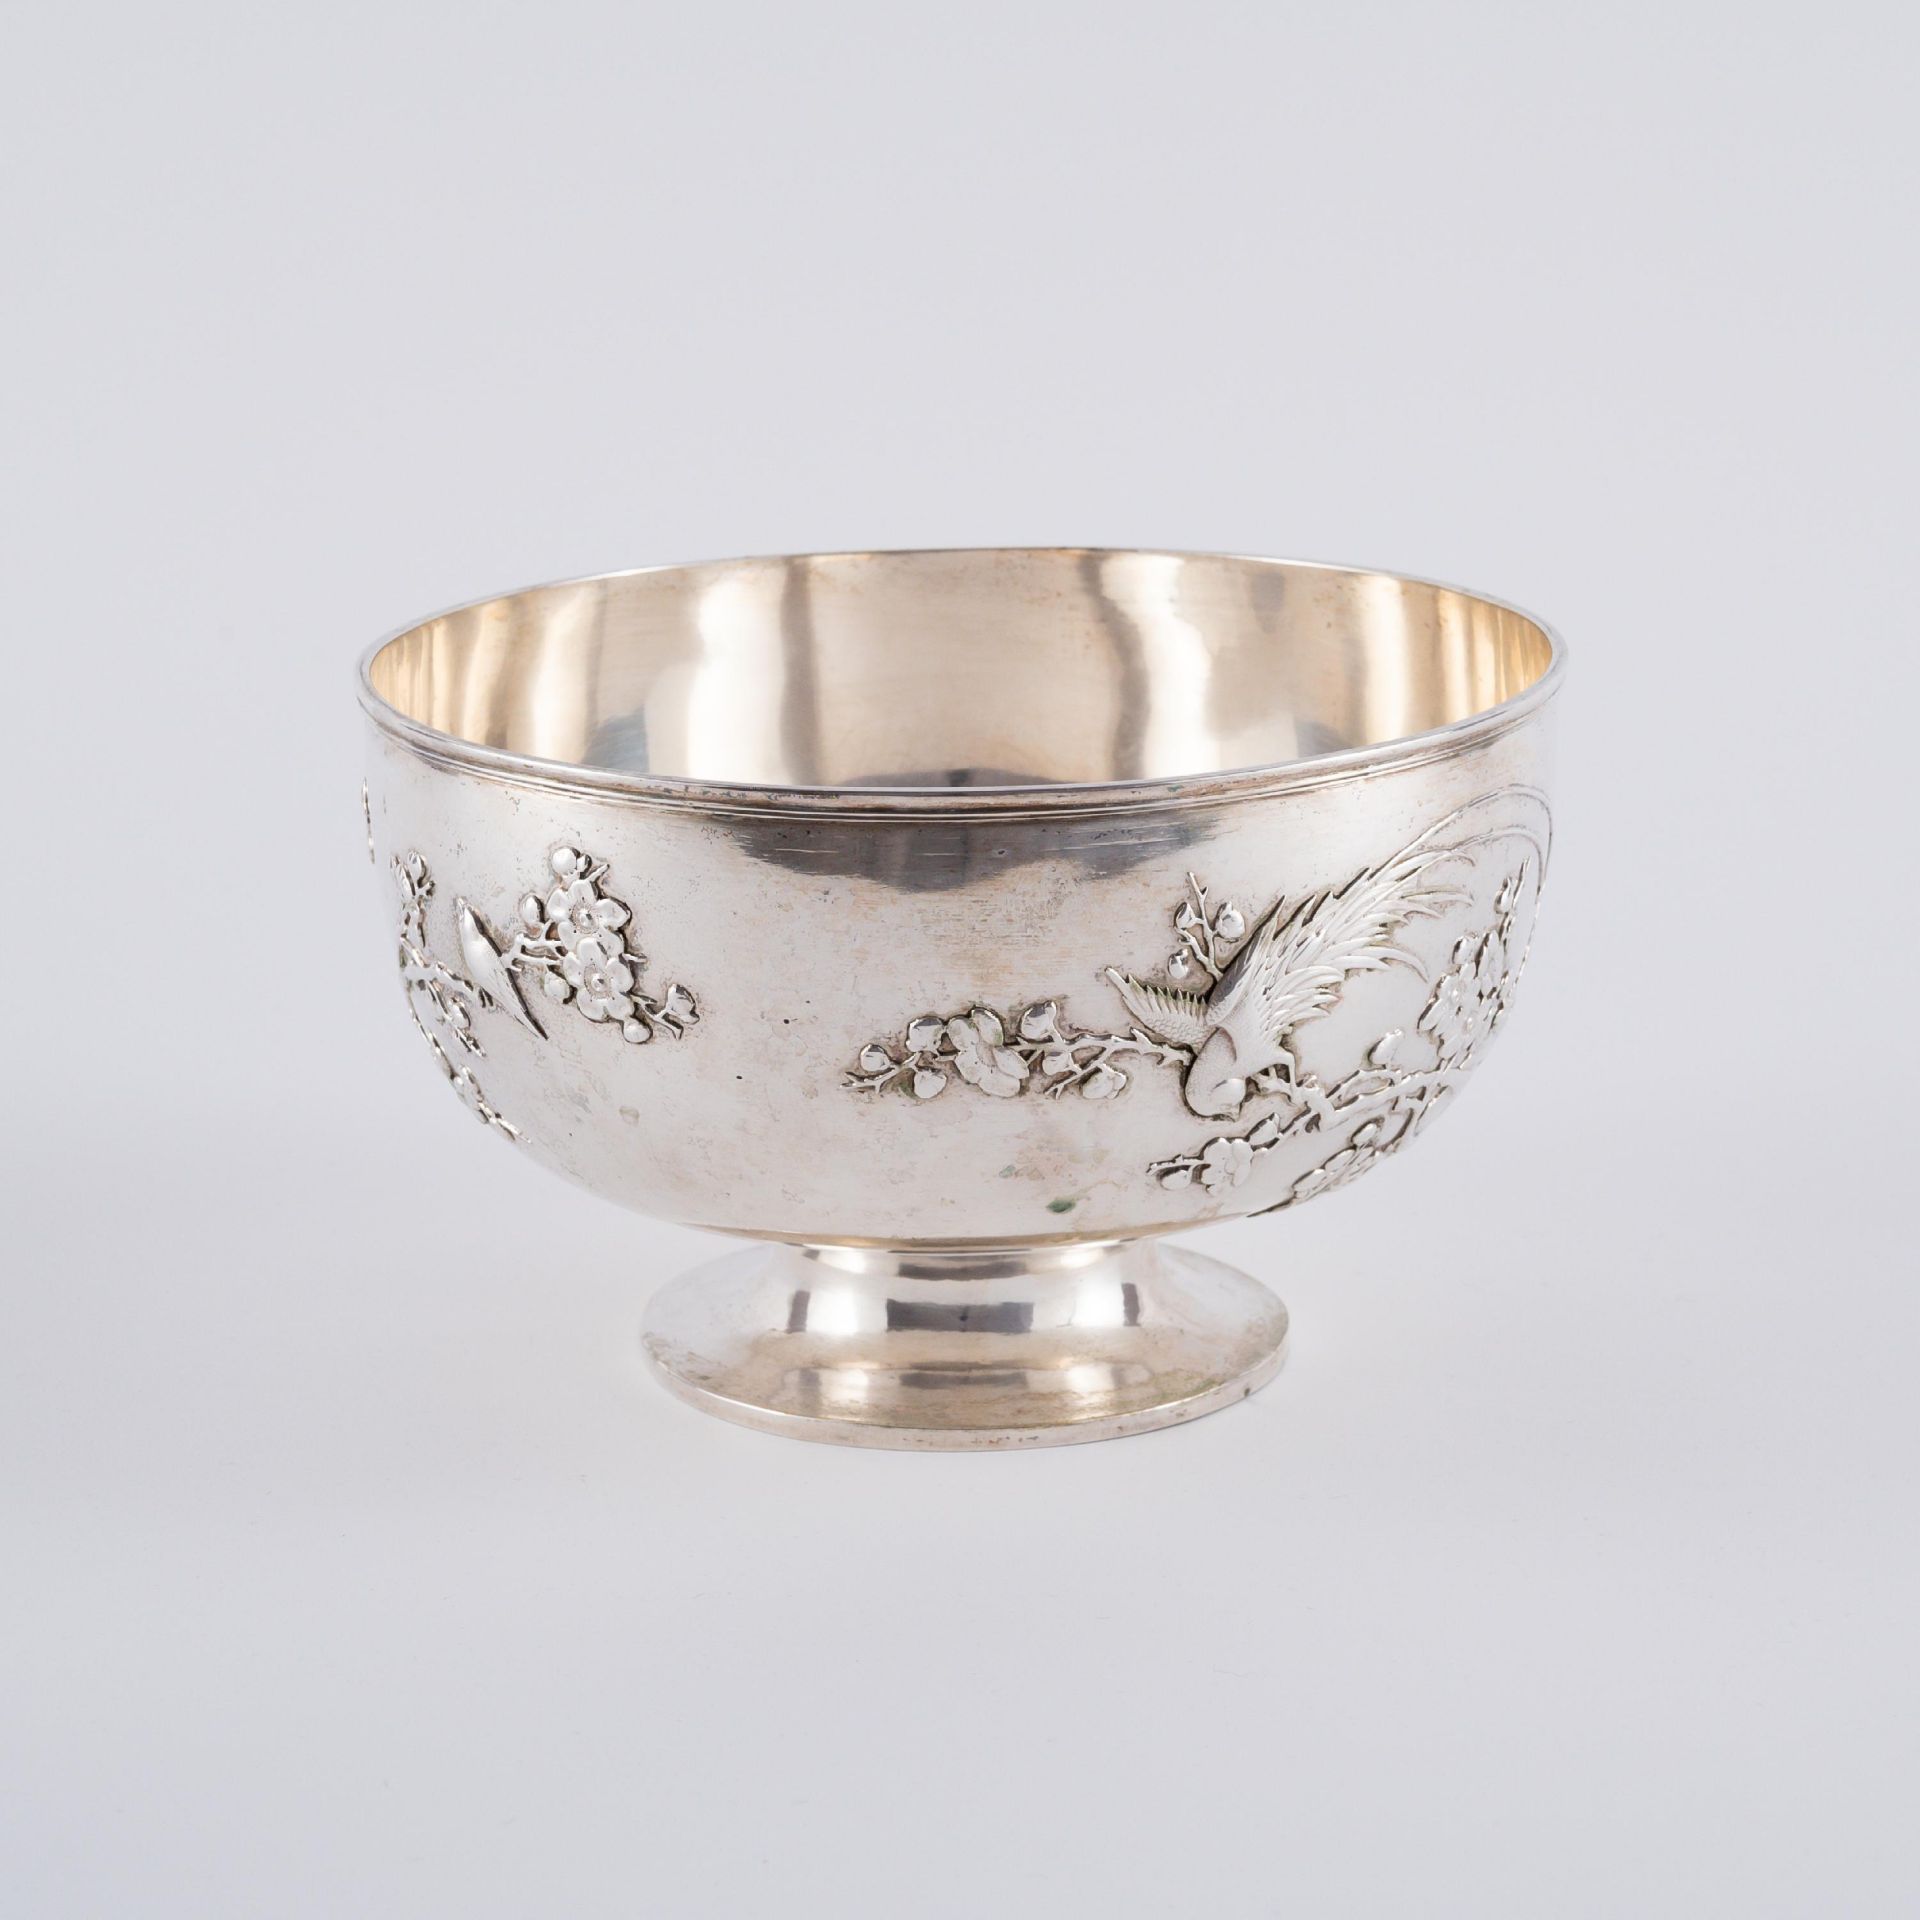 FOOTED SILVER BOWL WITH CHERRYBLOSSOM BRANCH AND BIRD OF PARADISE - Image 4 of 6